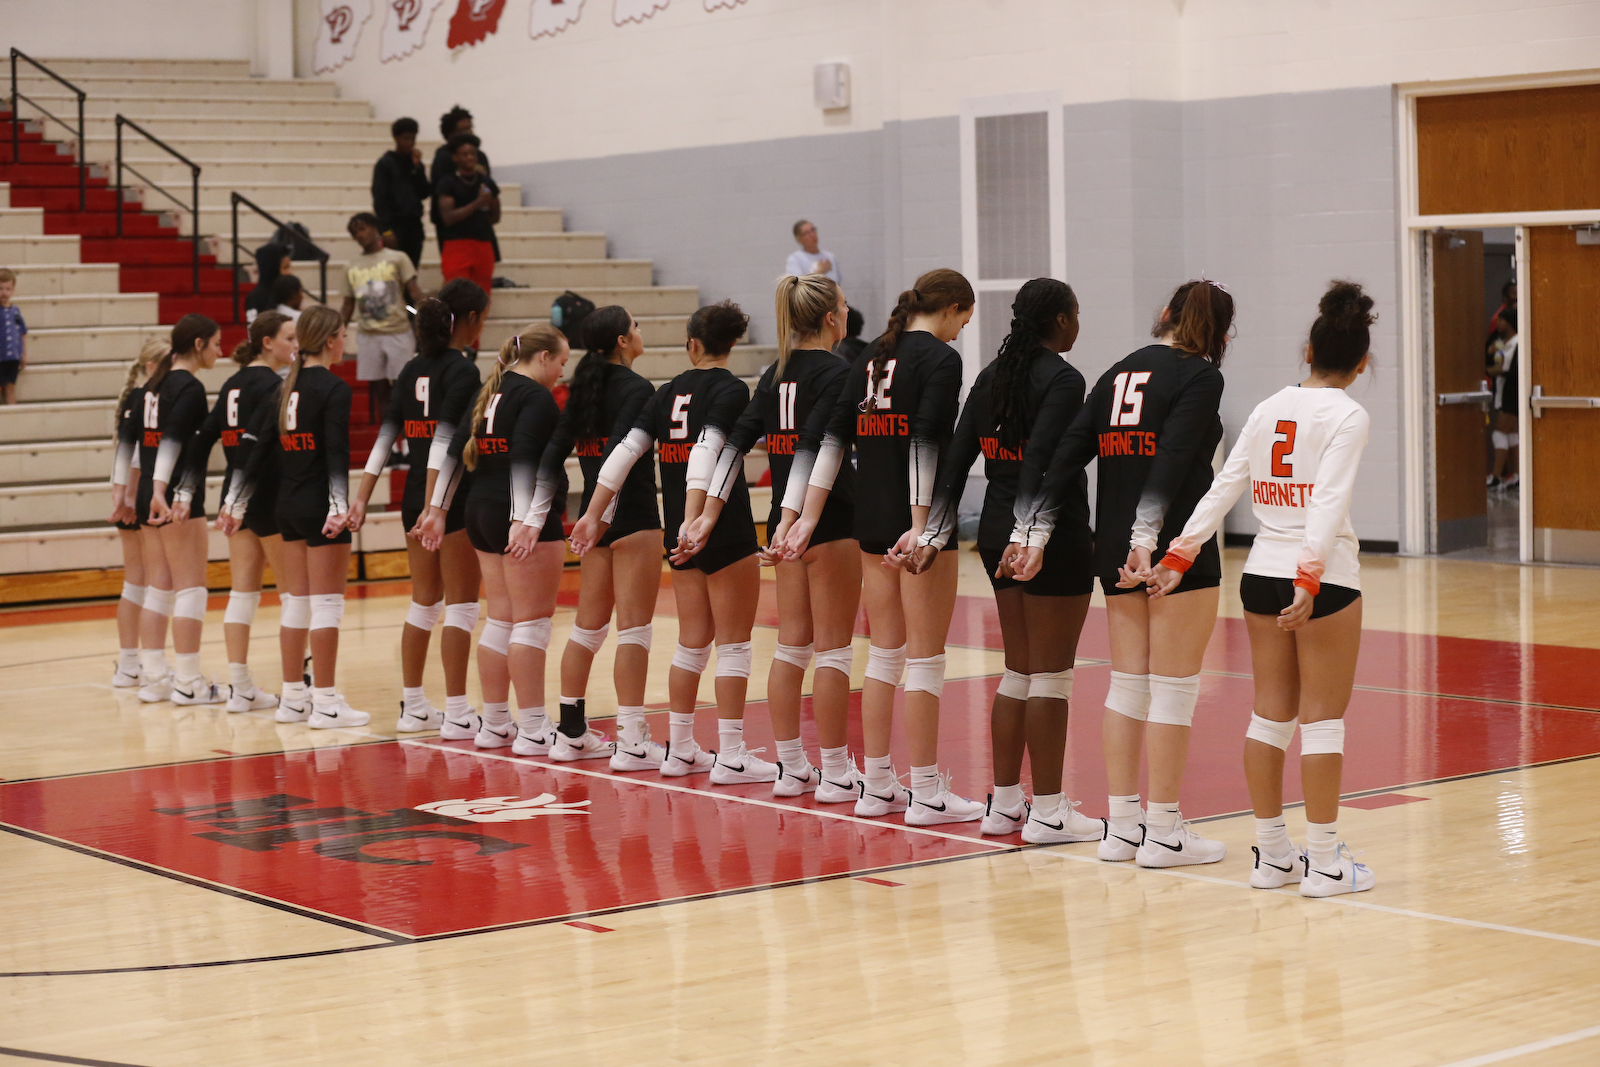 Girls' Volleyball v. Pike gallery cover photo